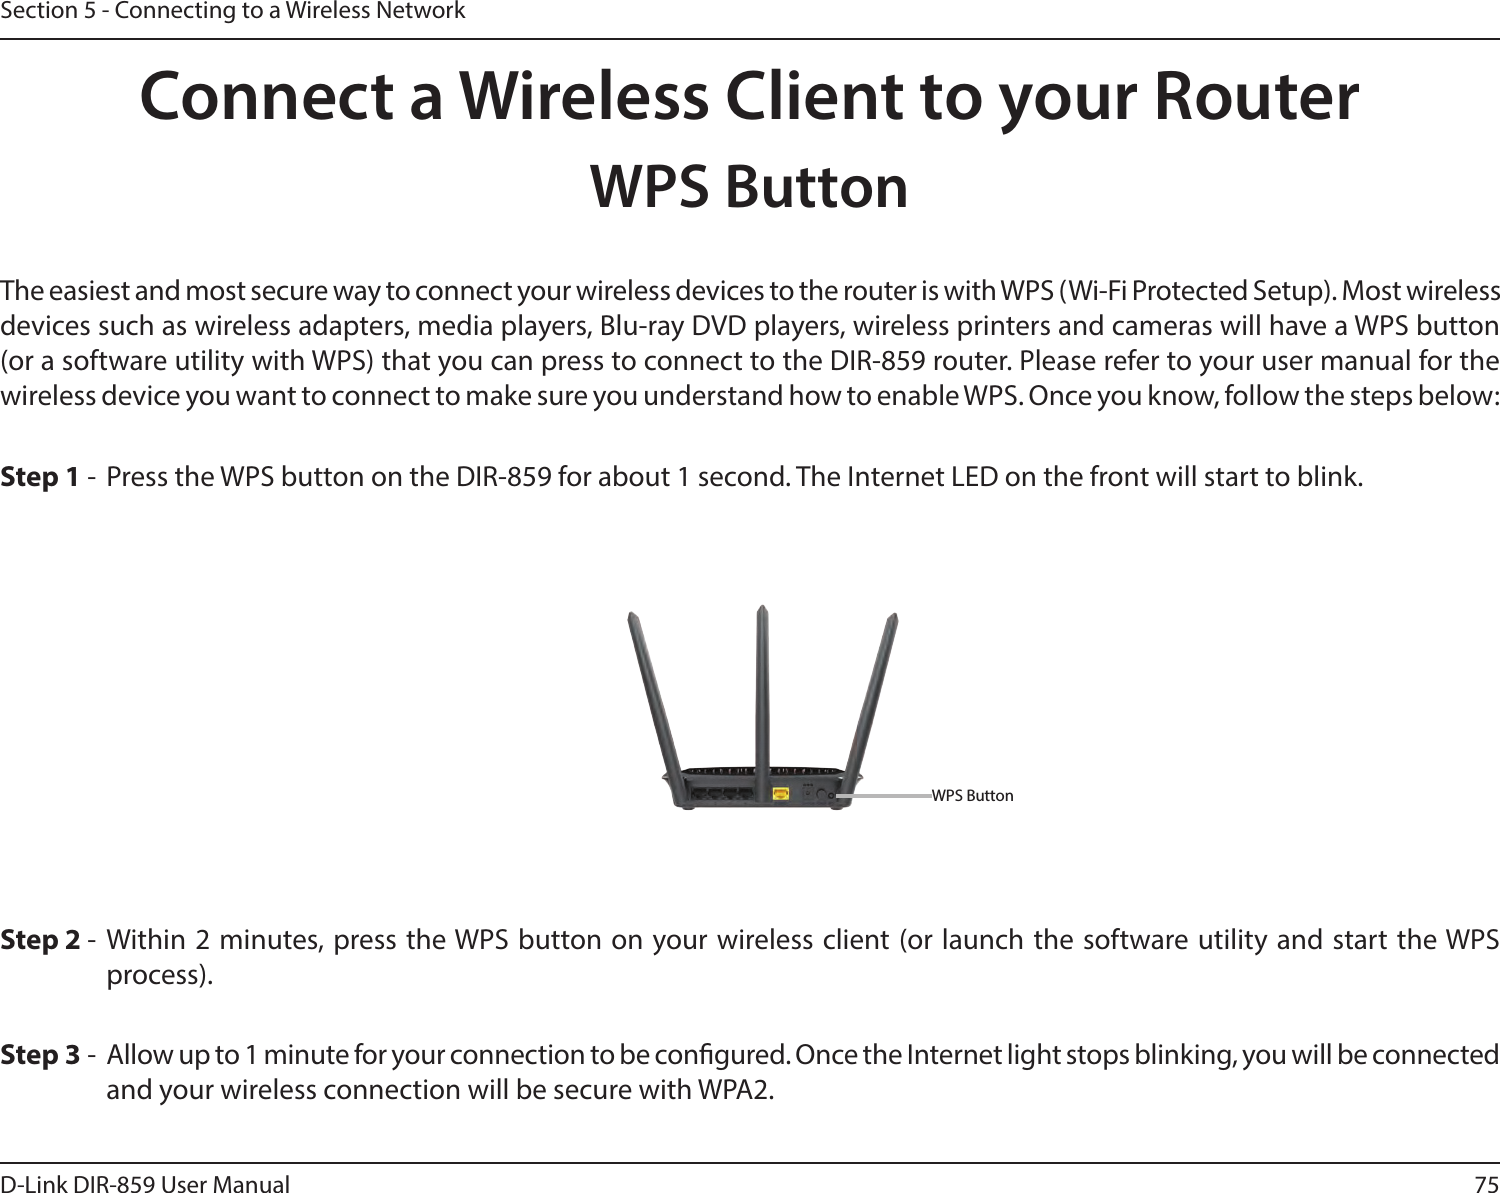 75D-Link DIR-859 User ManualSection 5 - Connecting to a Wireless NetworkConnect a Wireless Client to your RouterWPS ButtonStep 2 - Within 2 minutes, press the WPS button on your wireless client (or launch the software utility and start the WPS process).The easiest and most secure way to connect your wireless devices to the router is with WPS (Wi-Fi Protected Setup). Most wireless devices such as wireless adapters, media players, Blu-ray DVD players, wireless printers and cameras will have a WPS button (or a software utility with WPS) that you can press to connect to the DIR-859 router. Please refer to your user manual for the wireless device you want to connect to make sure you understand how to enable WPS. Once you know, follow the steps below:Step 1 -  Press the WPS button on the DIR-859 for about 1 second. The Internet LED on the front will start to blink.Step 3 -  Allow up to 1 minute for your connection to be congured. Once the Internet light stops blinking, you will be connected and your wireless connection will be secure with WPA2.WPS Button